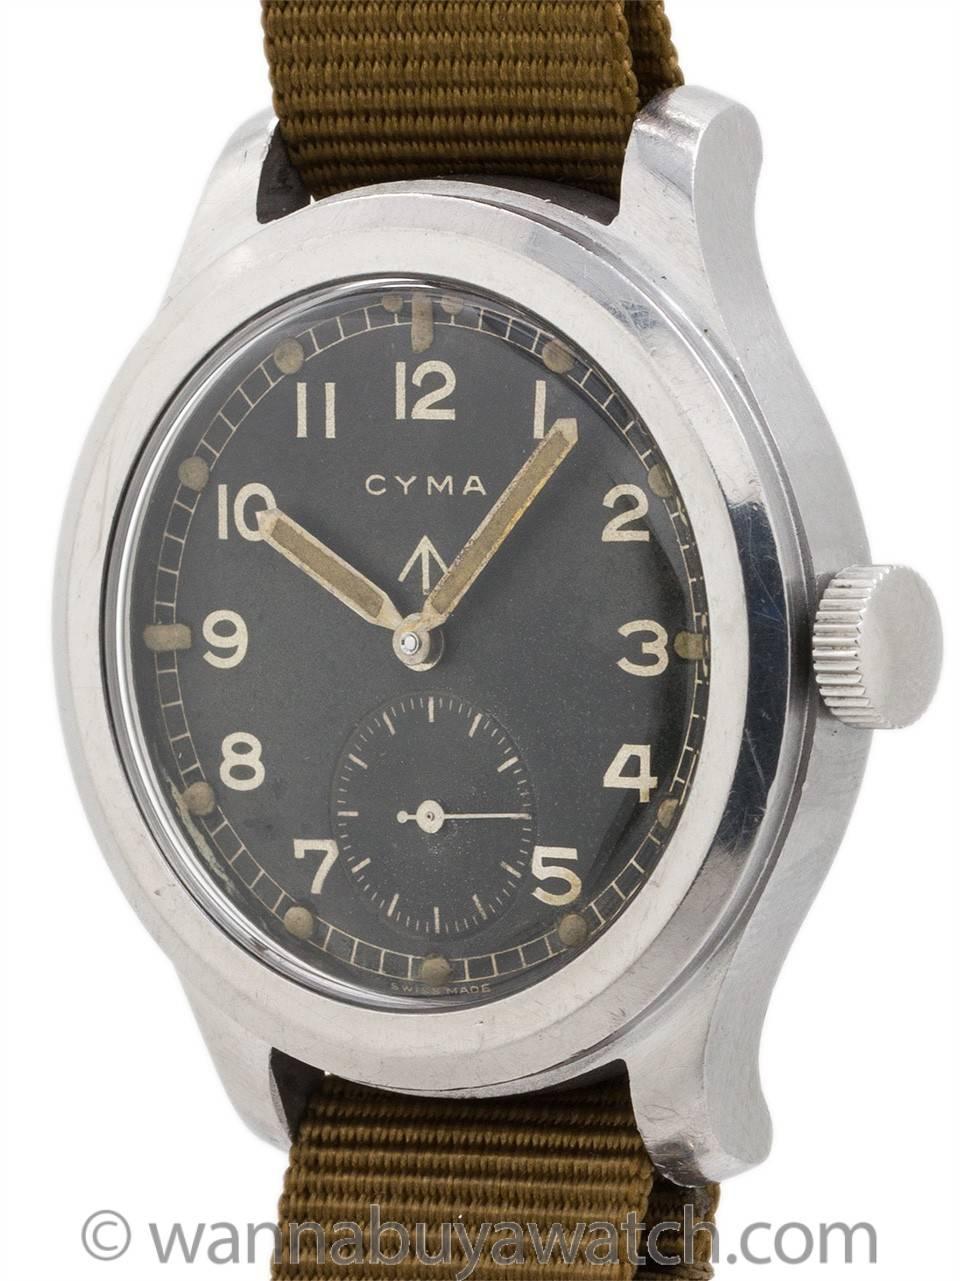 British Military issue Cyma wristwatch circa 1940’s. Great condition large size 38 X 44 robust screw back case with very nice condition original matte black dial with nicely patina’d large luminous indexes and matching luminous pencil style hands.